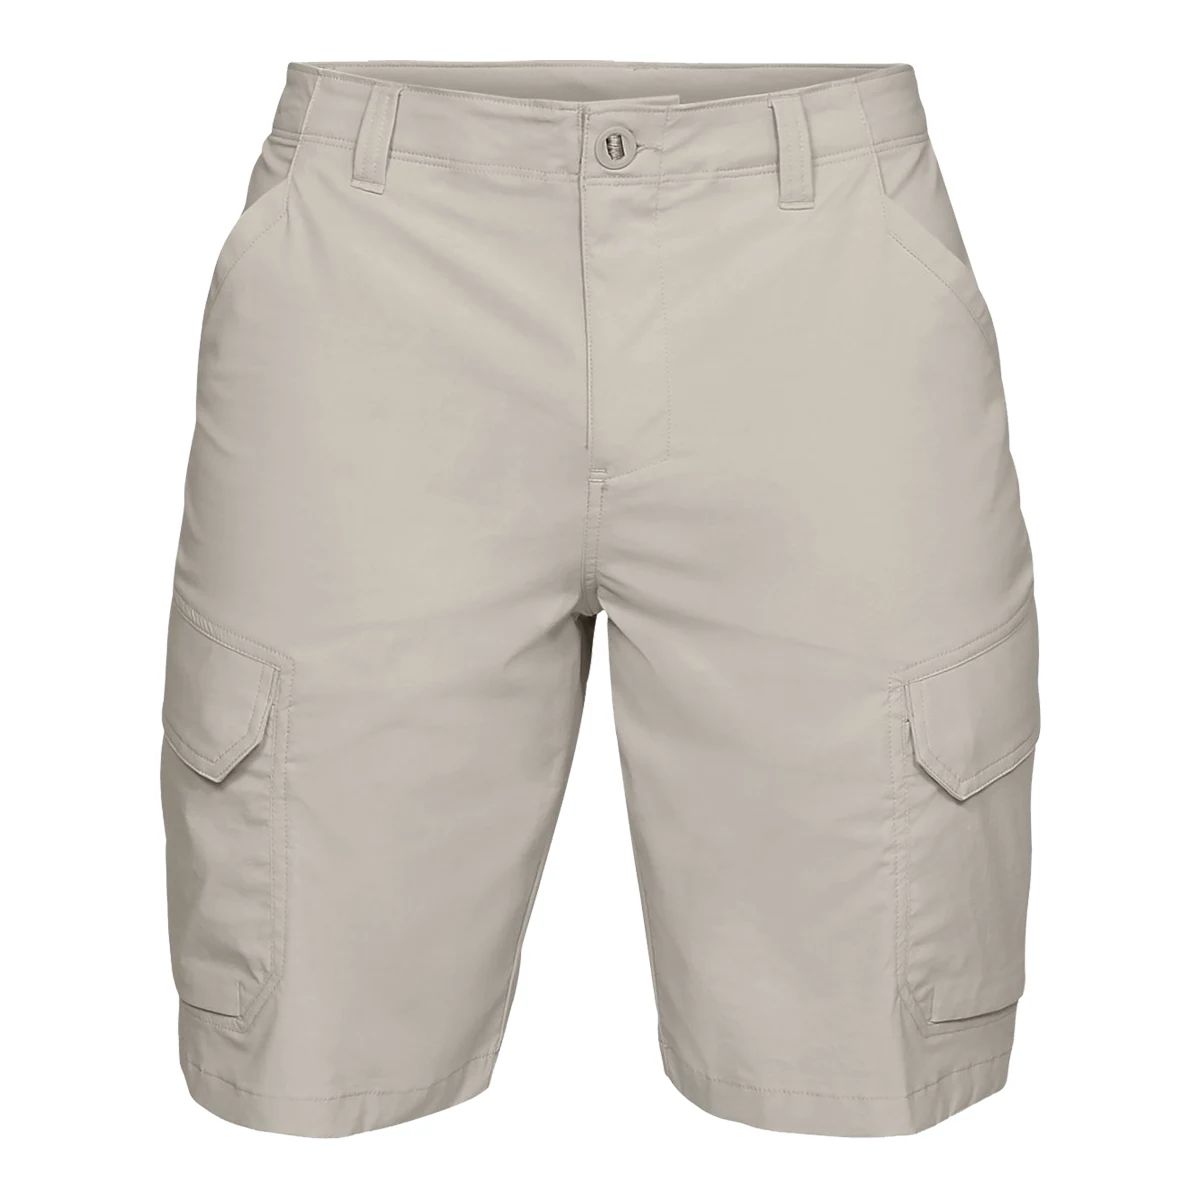 Blue Under Armour Armour Cargo Shorts Mens - Get The Label